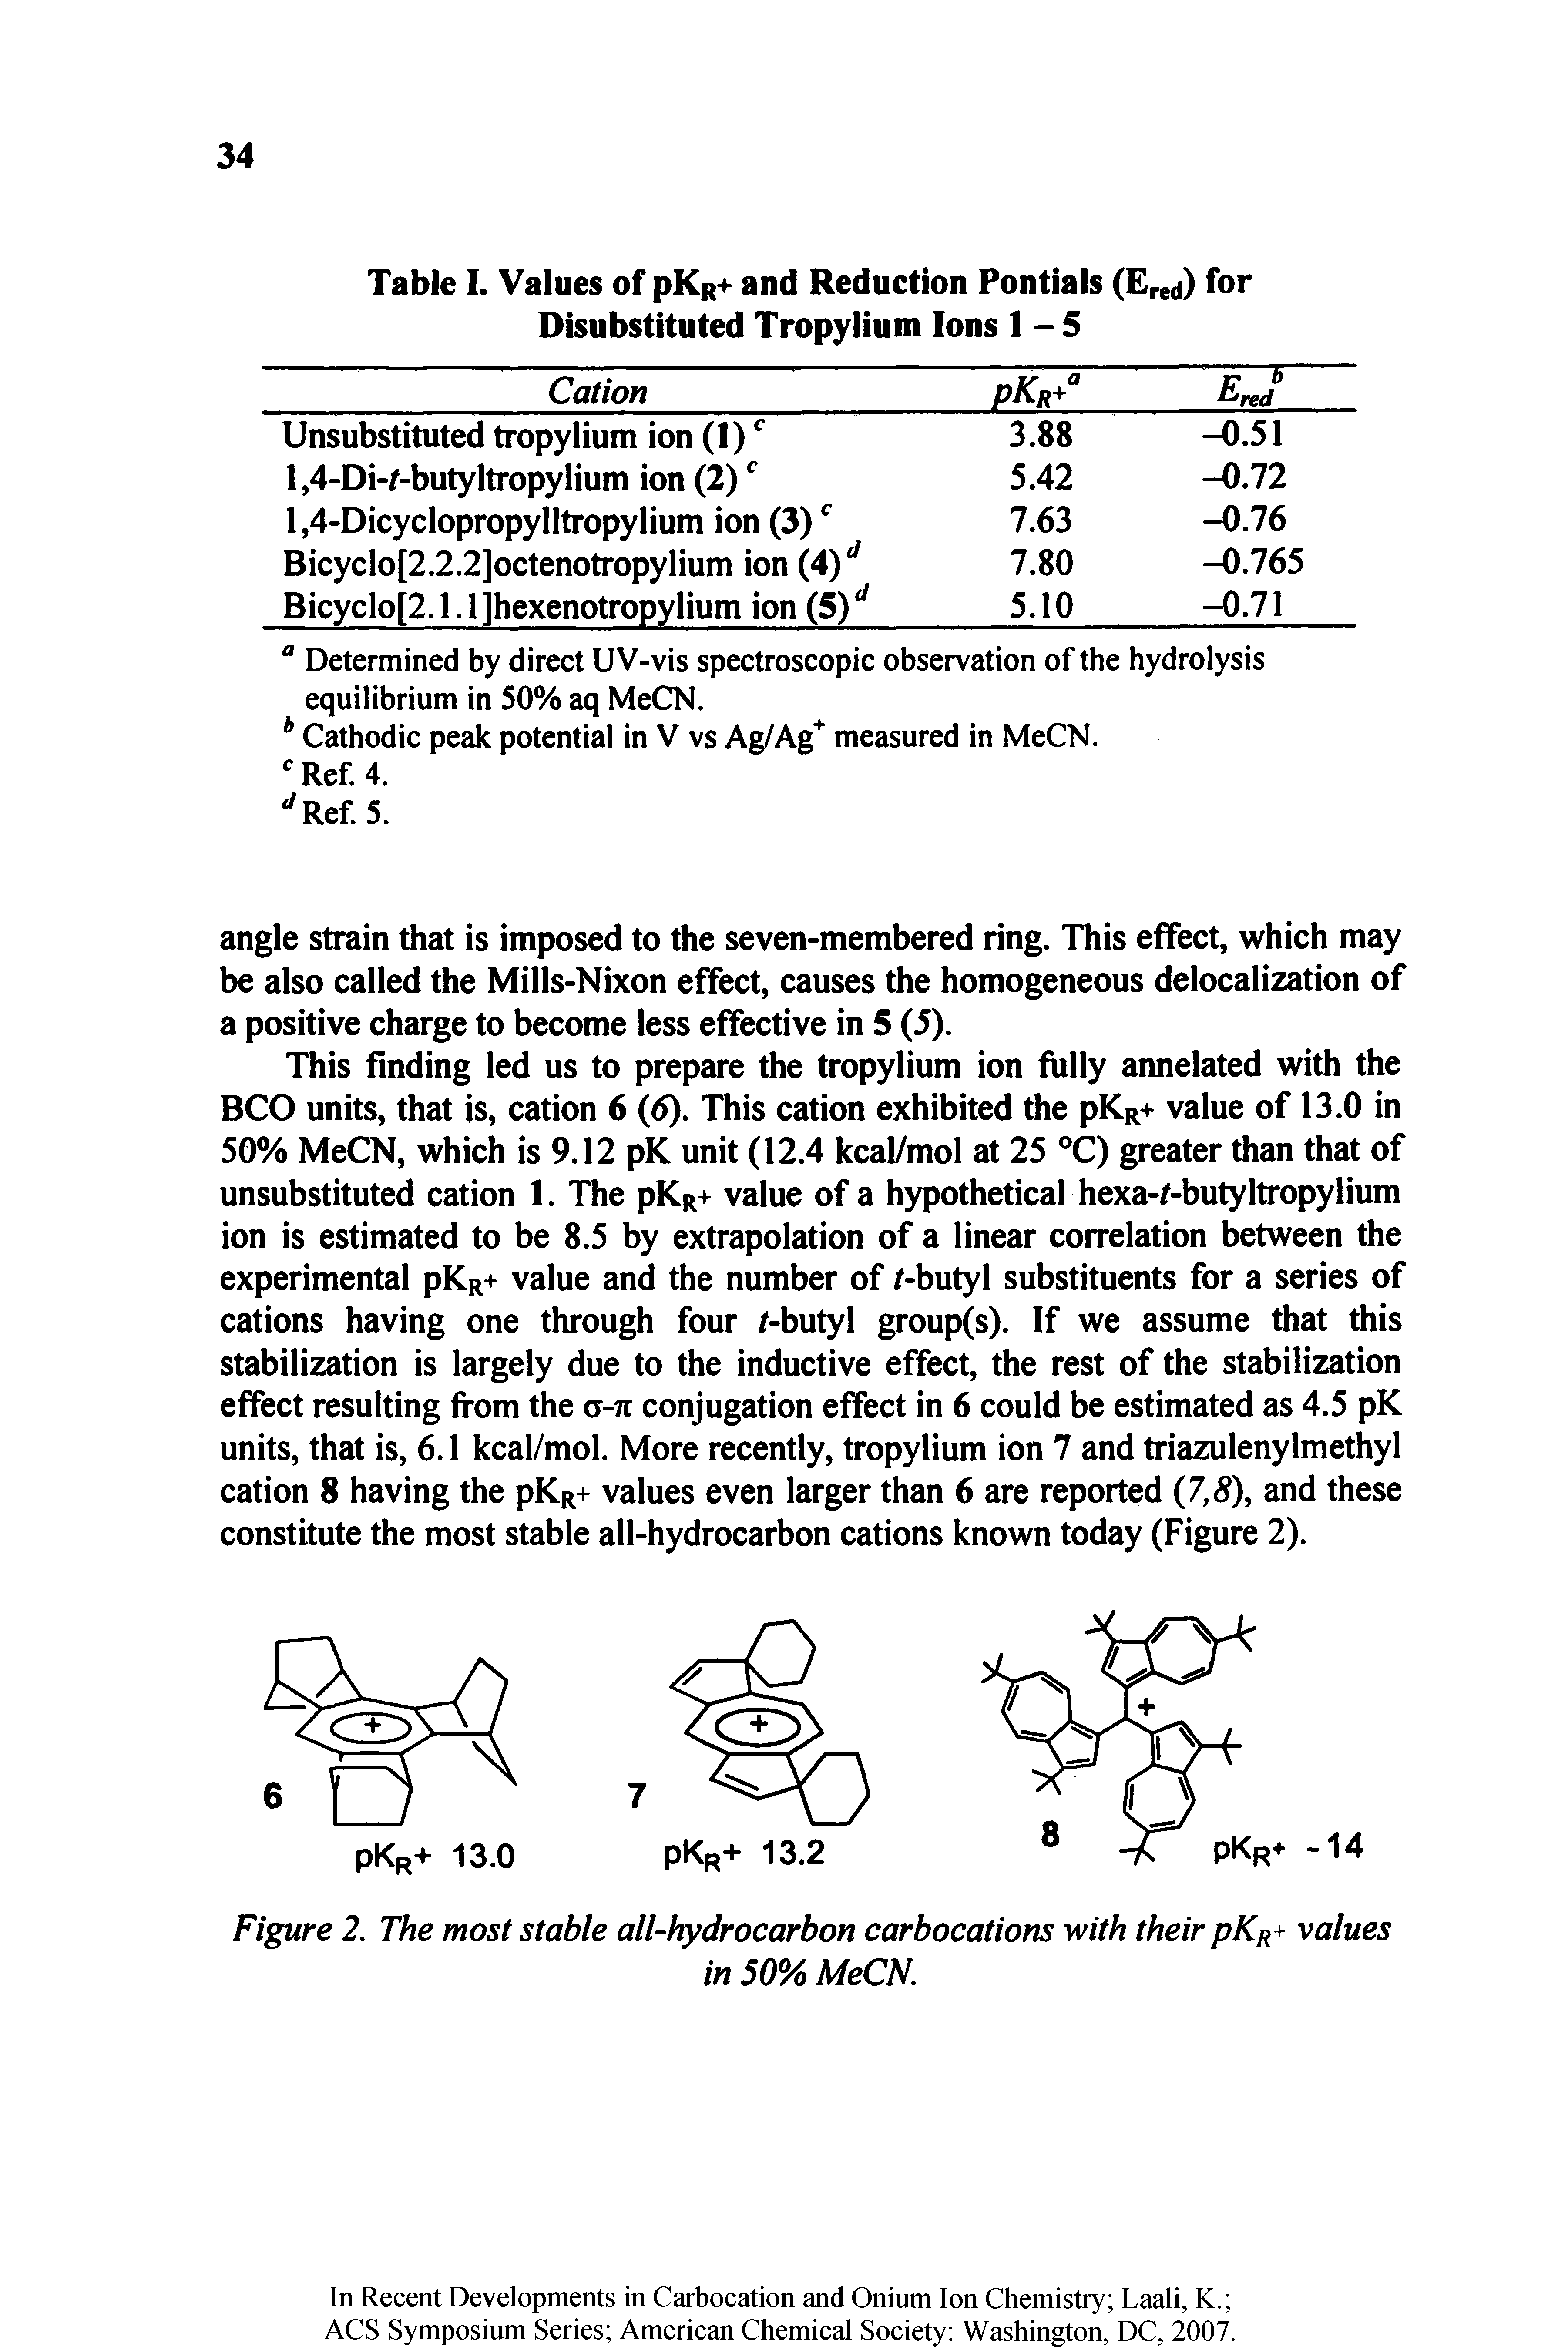 Figure 2. The most stable all-hydrocarbon carbocations with their pKR+ values...